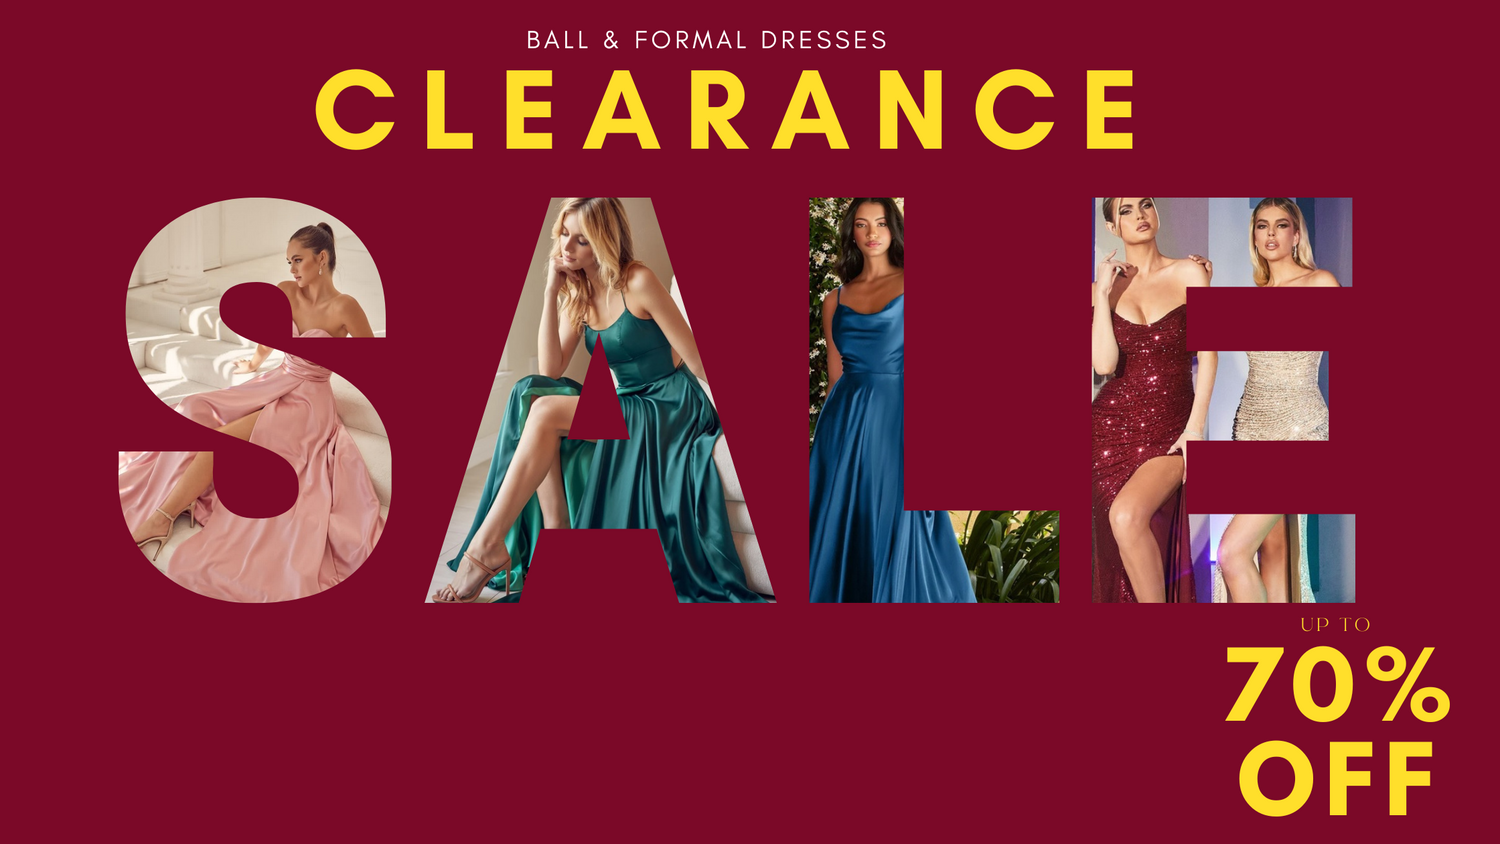 ball dresses and formal dresses perth australia clearance sale envious bridal & formal